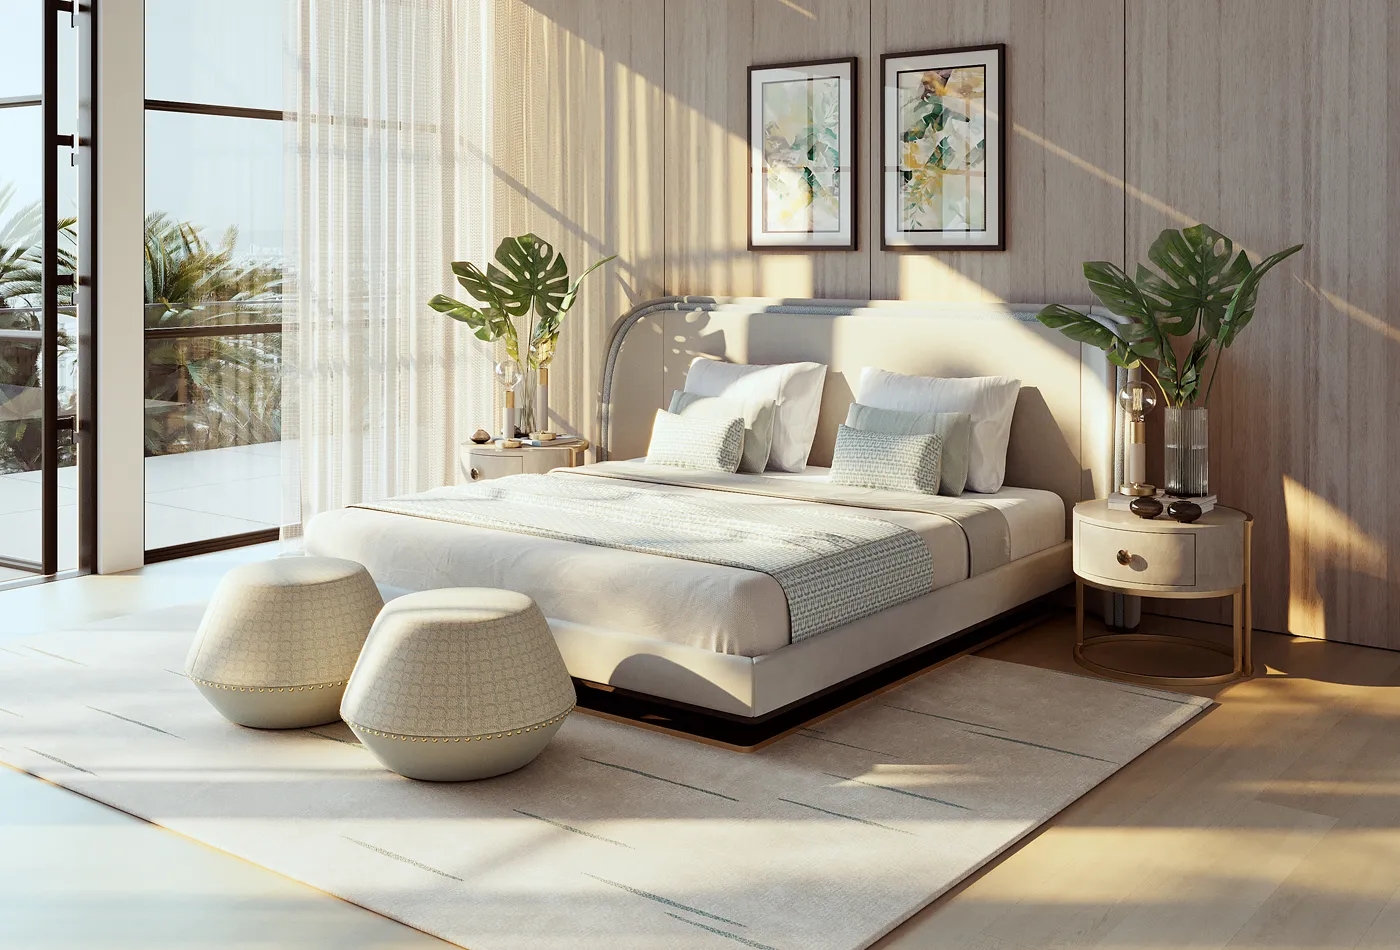 LET THE LIGHT INTO THE BEDROOM - Bedrooms